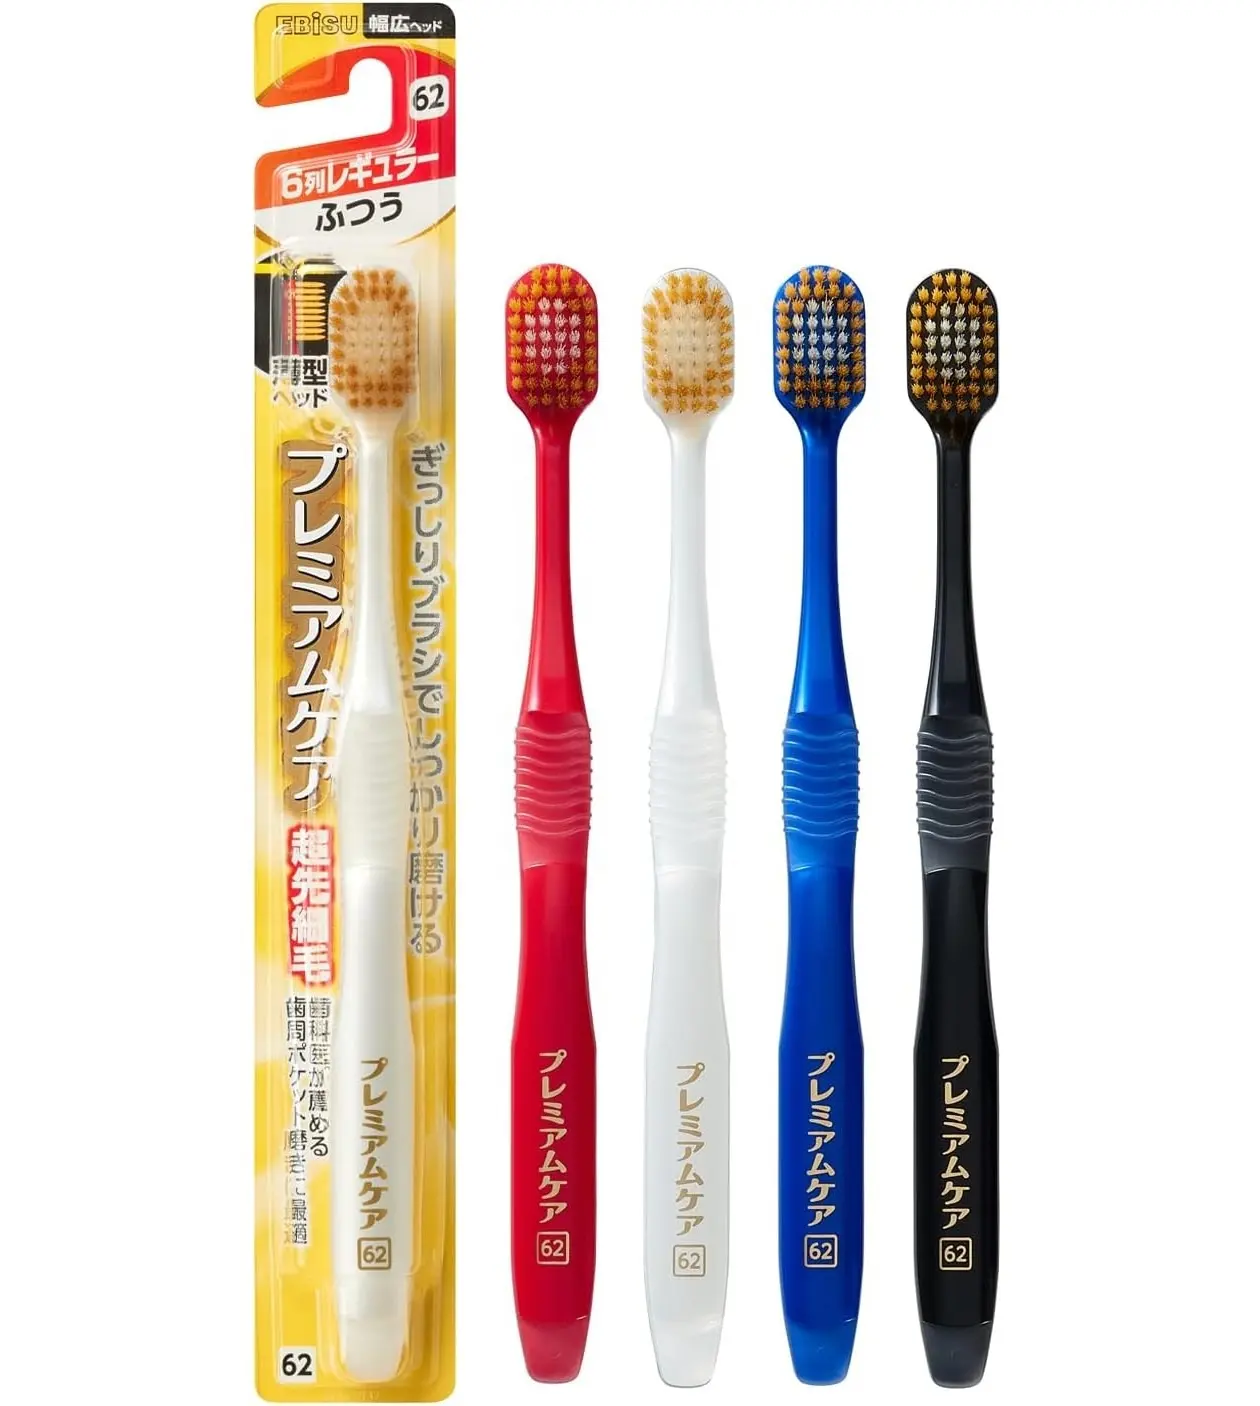 Made in Japan High Quality Ebisu Premium Care Toothbrush Wide Head for Adult Tooth Brush Toothbrushes Best Selling Products 2023